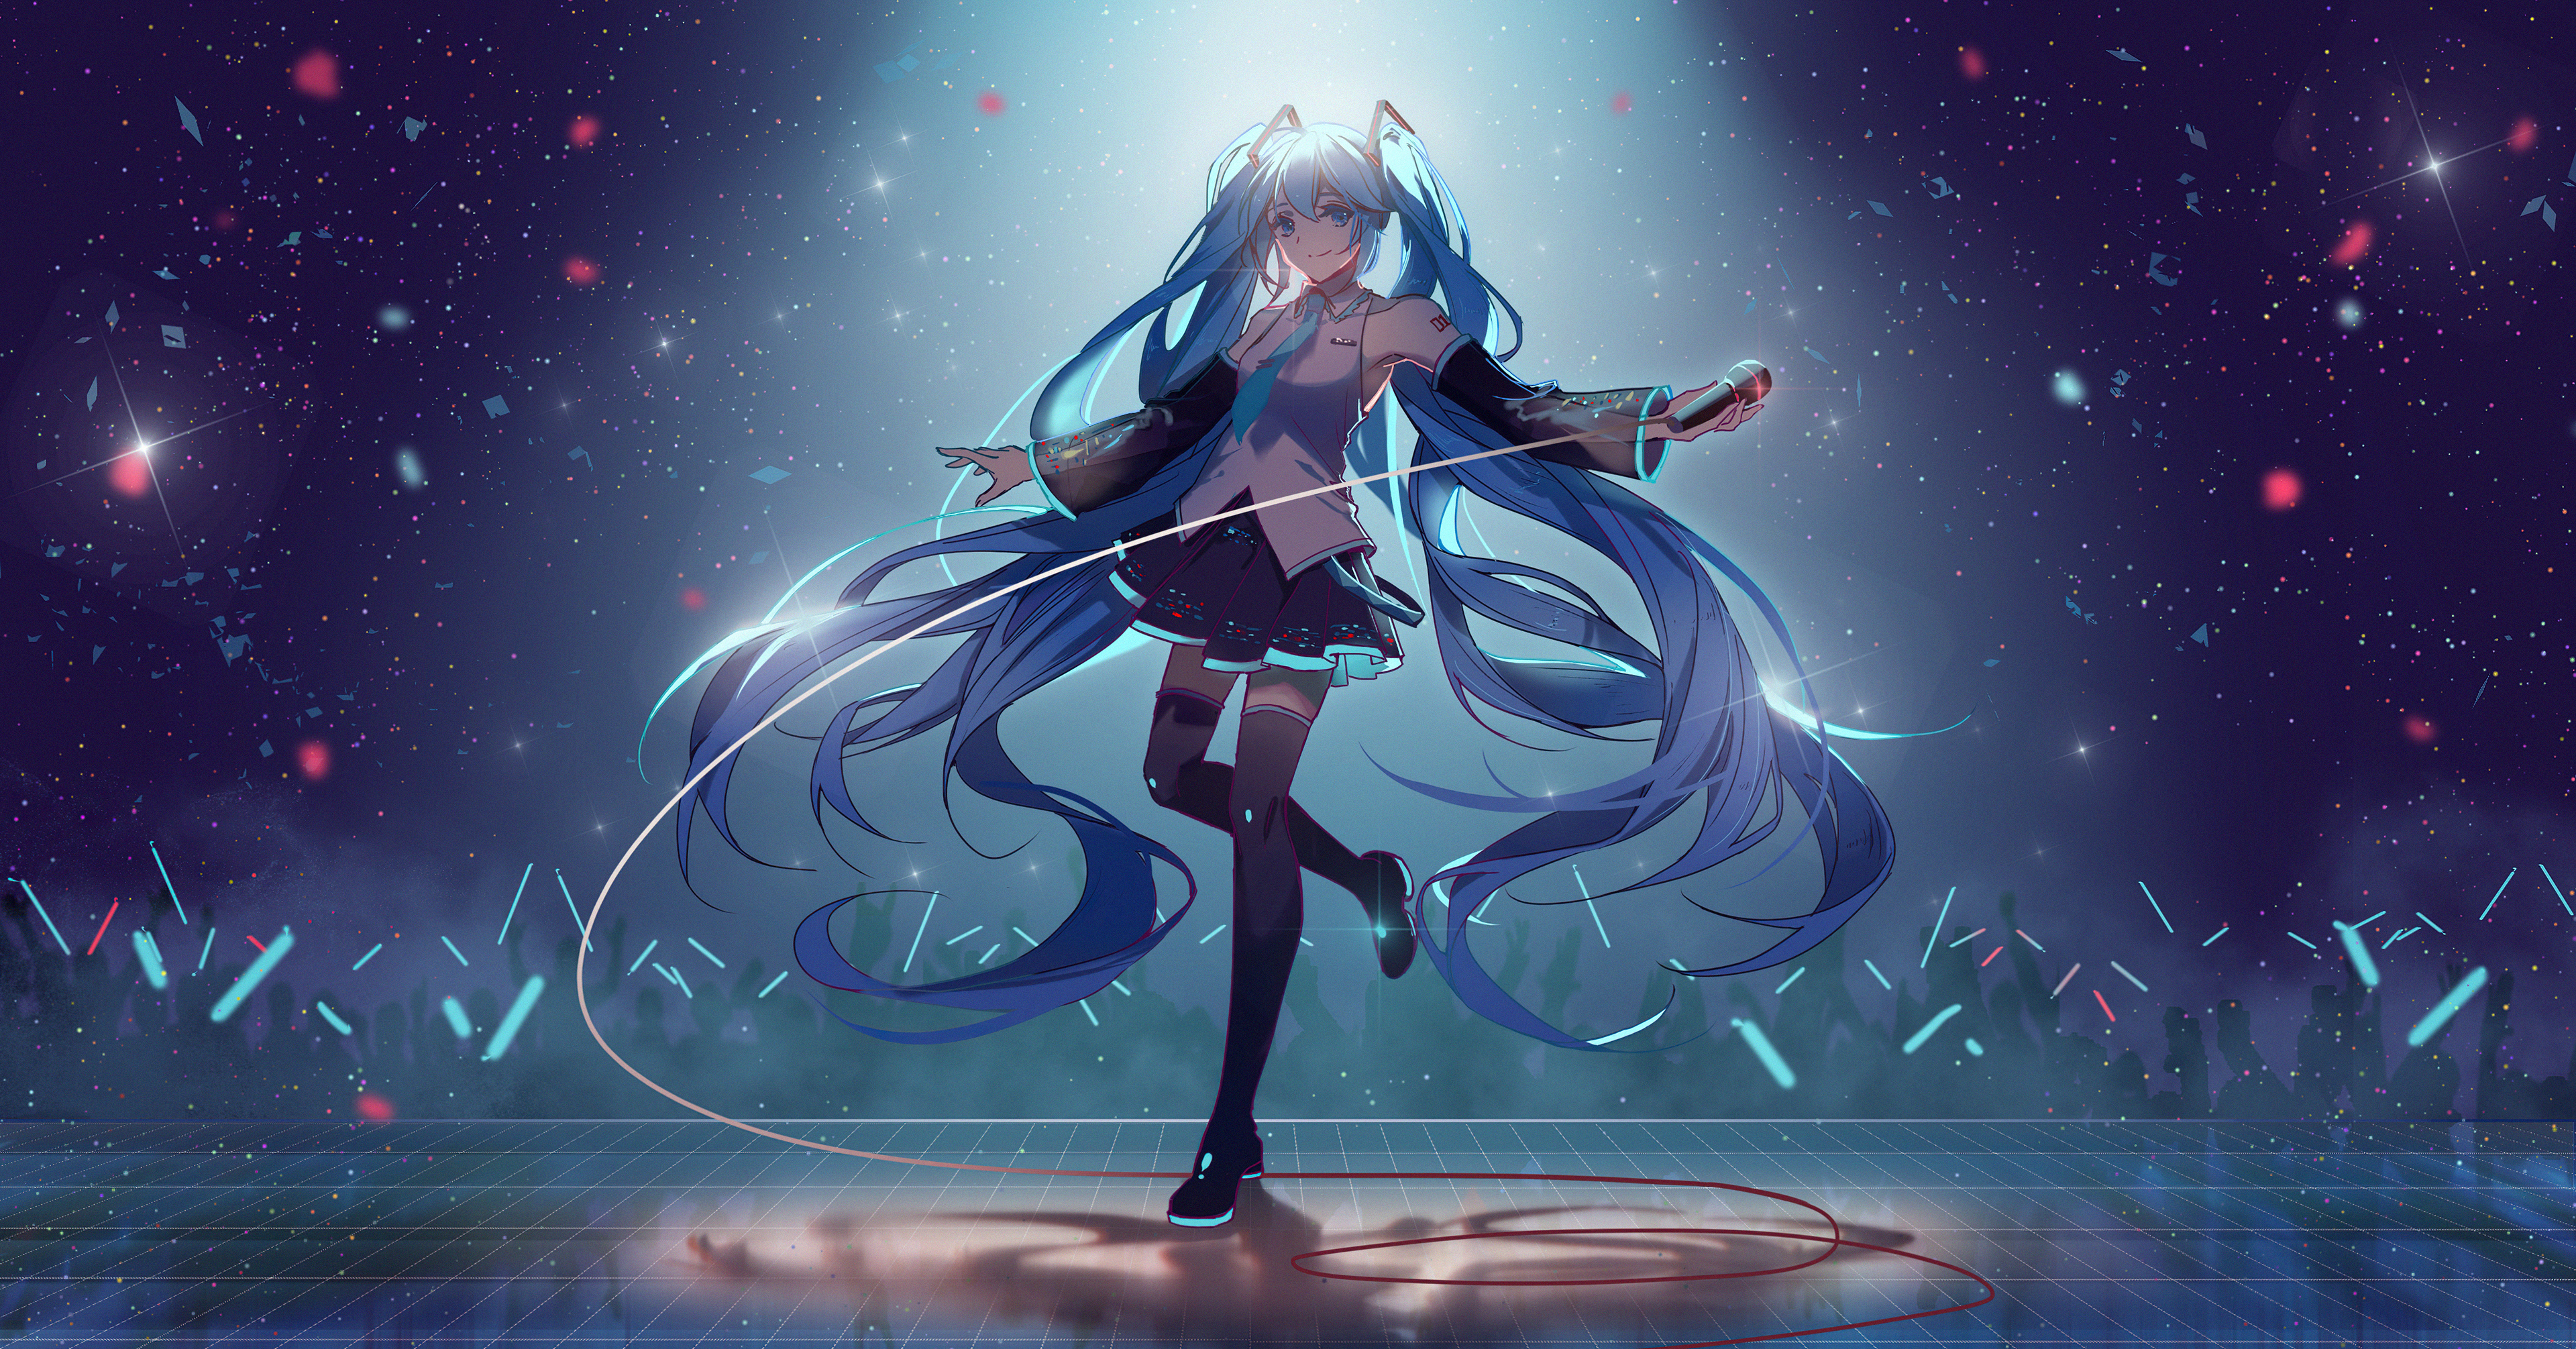 Vocaloid hatsune miku k hd anime k wallpapers images backgrounds photos and pictures